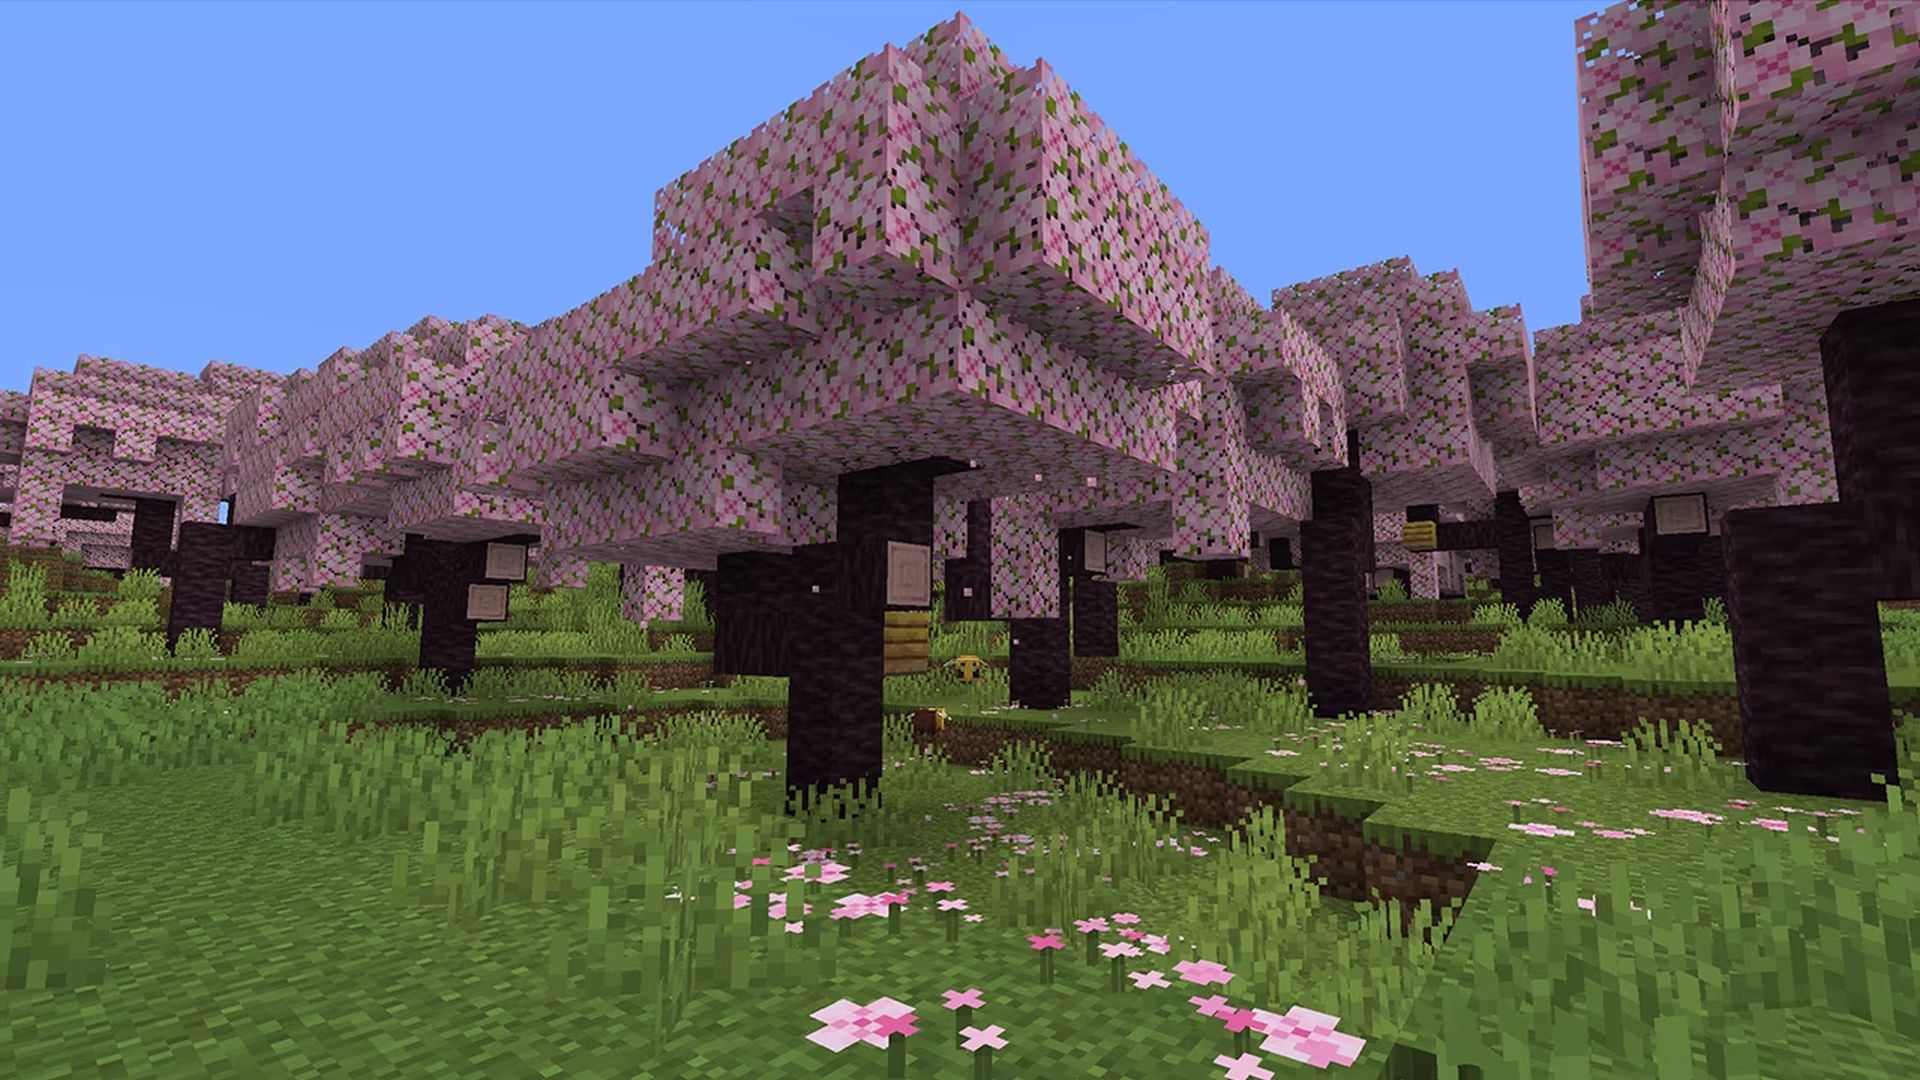 Minecraft: Release Date Update for PS Vita, PS4 and Xbox One